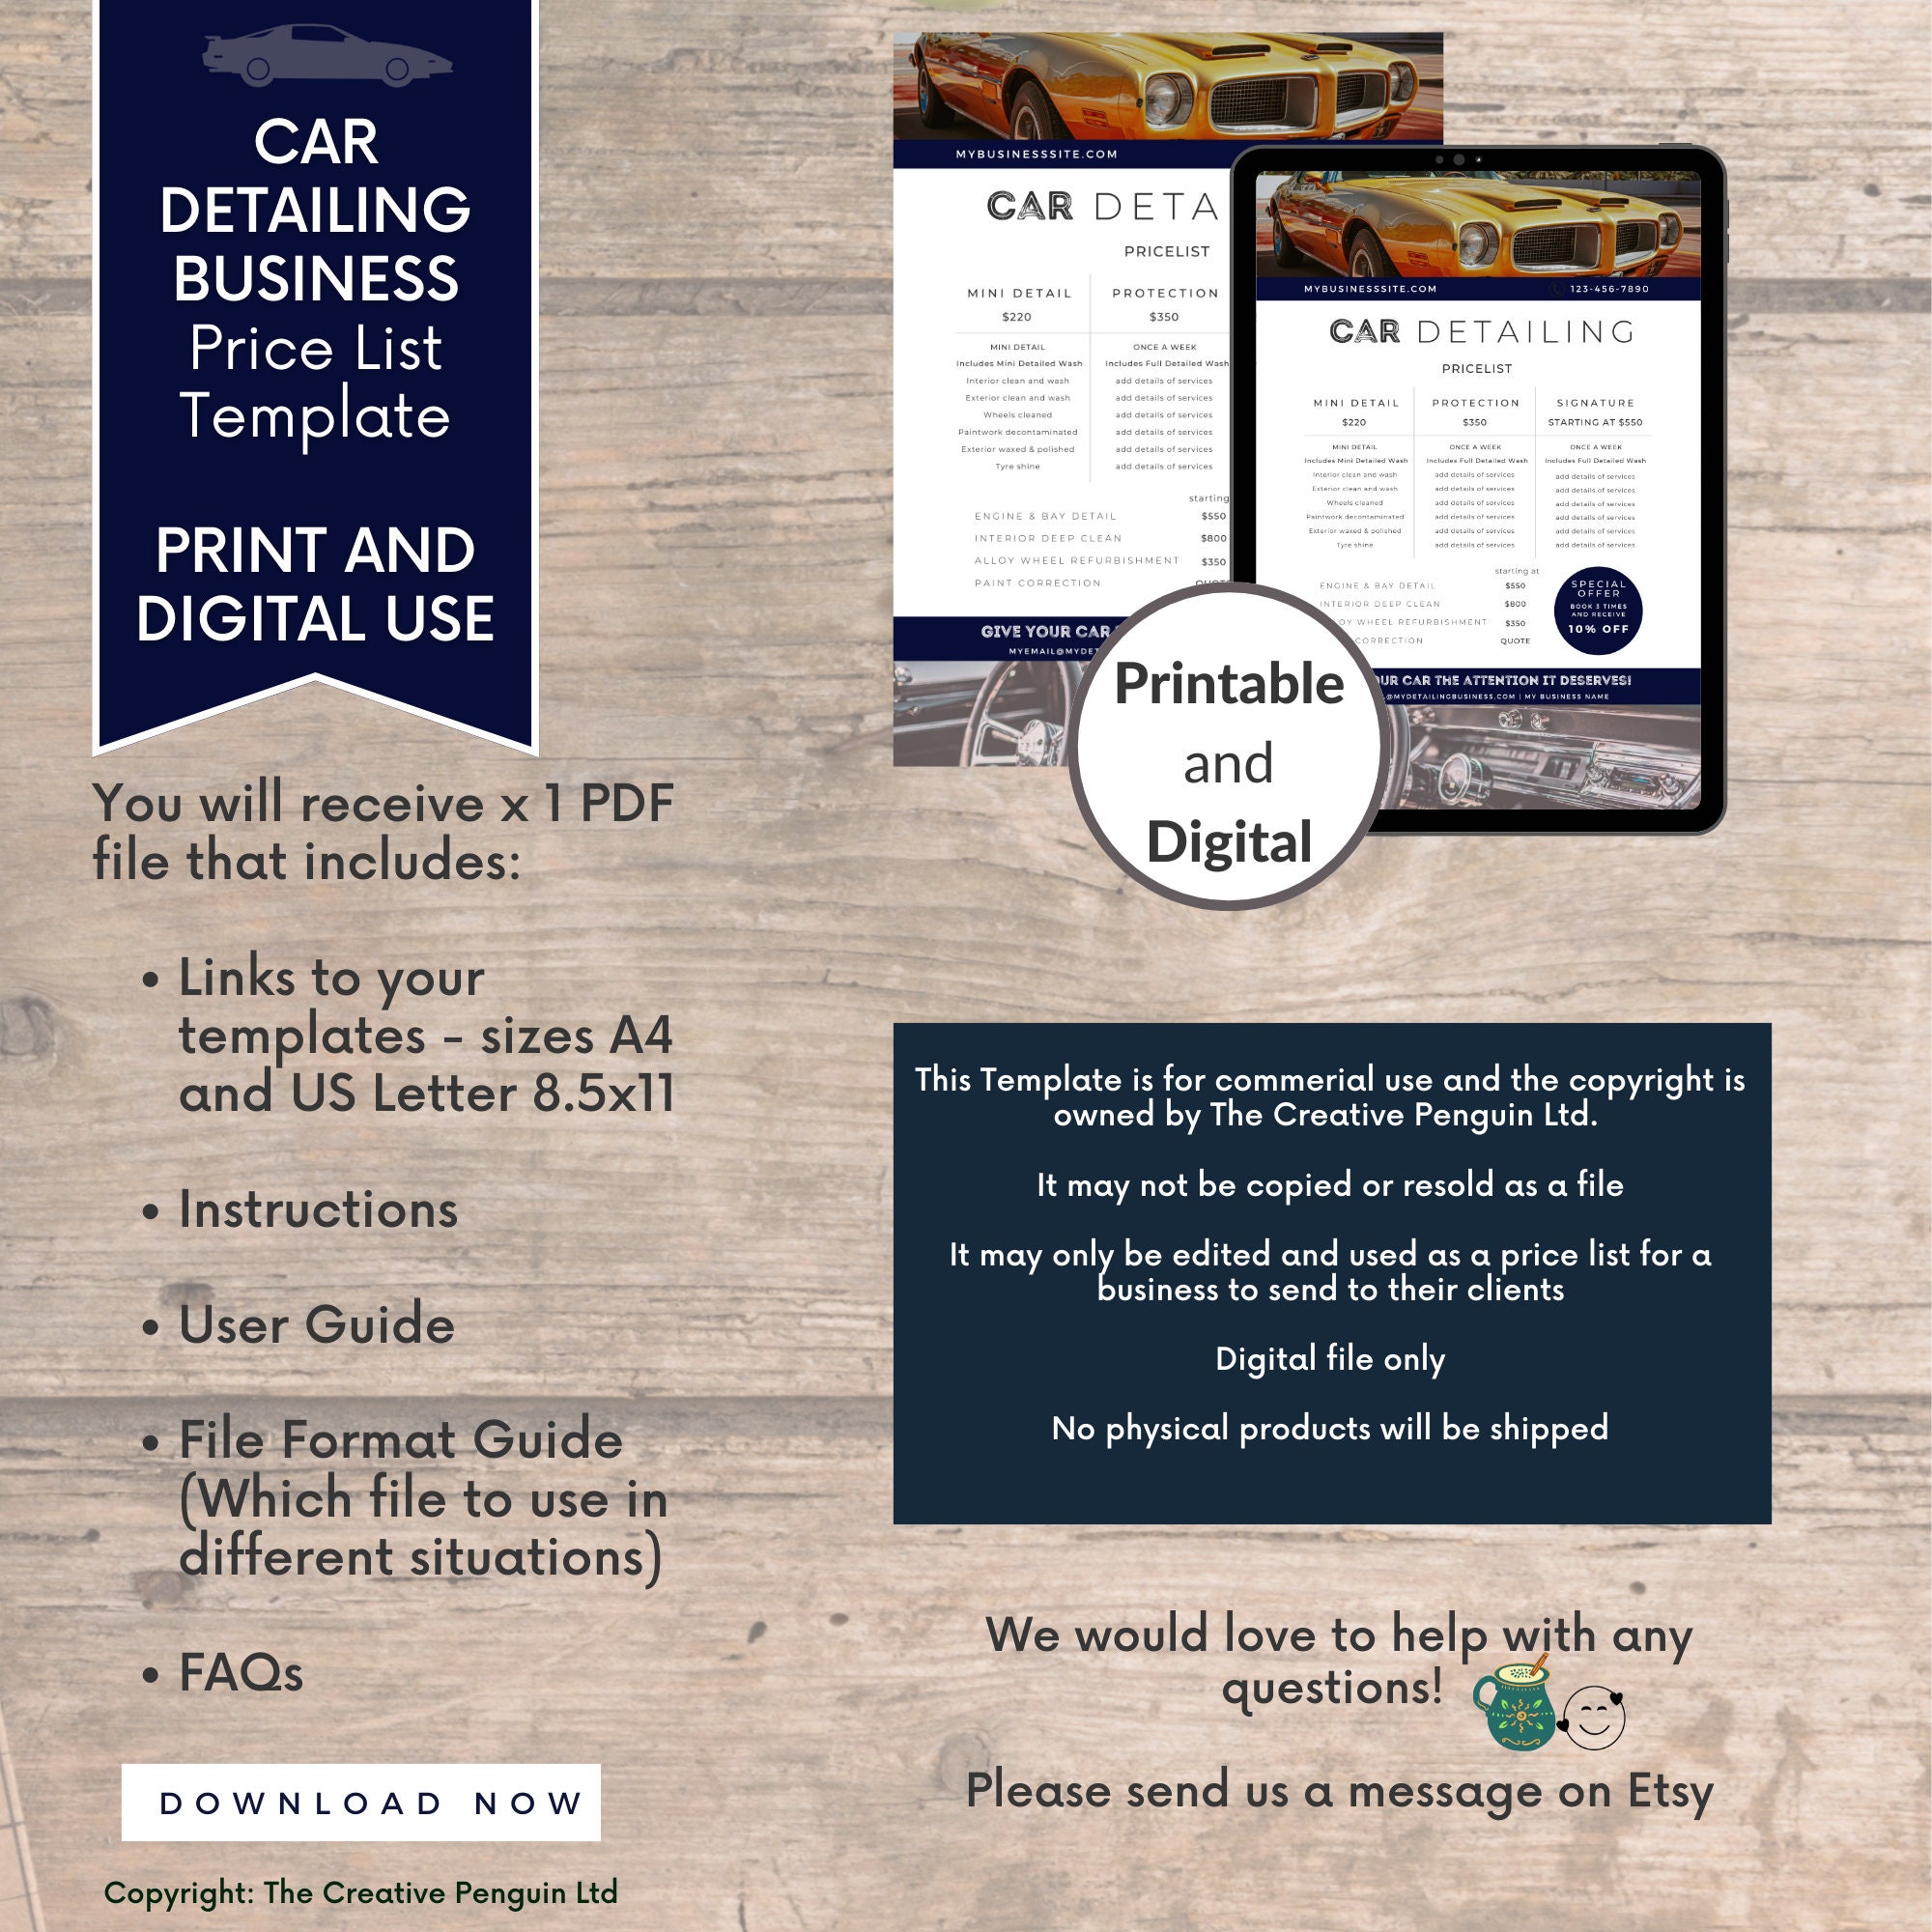 car-detailing-price-list-template-business-editable-pricing-etsy